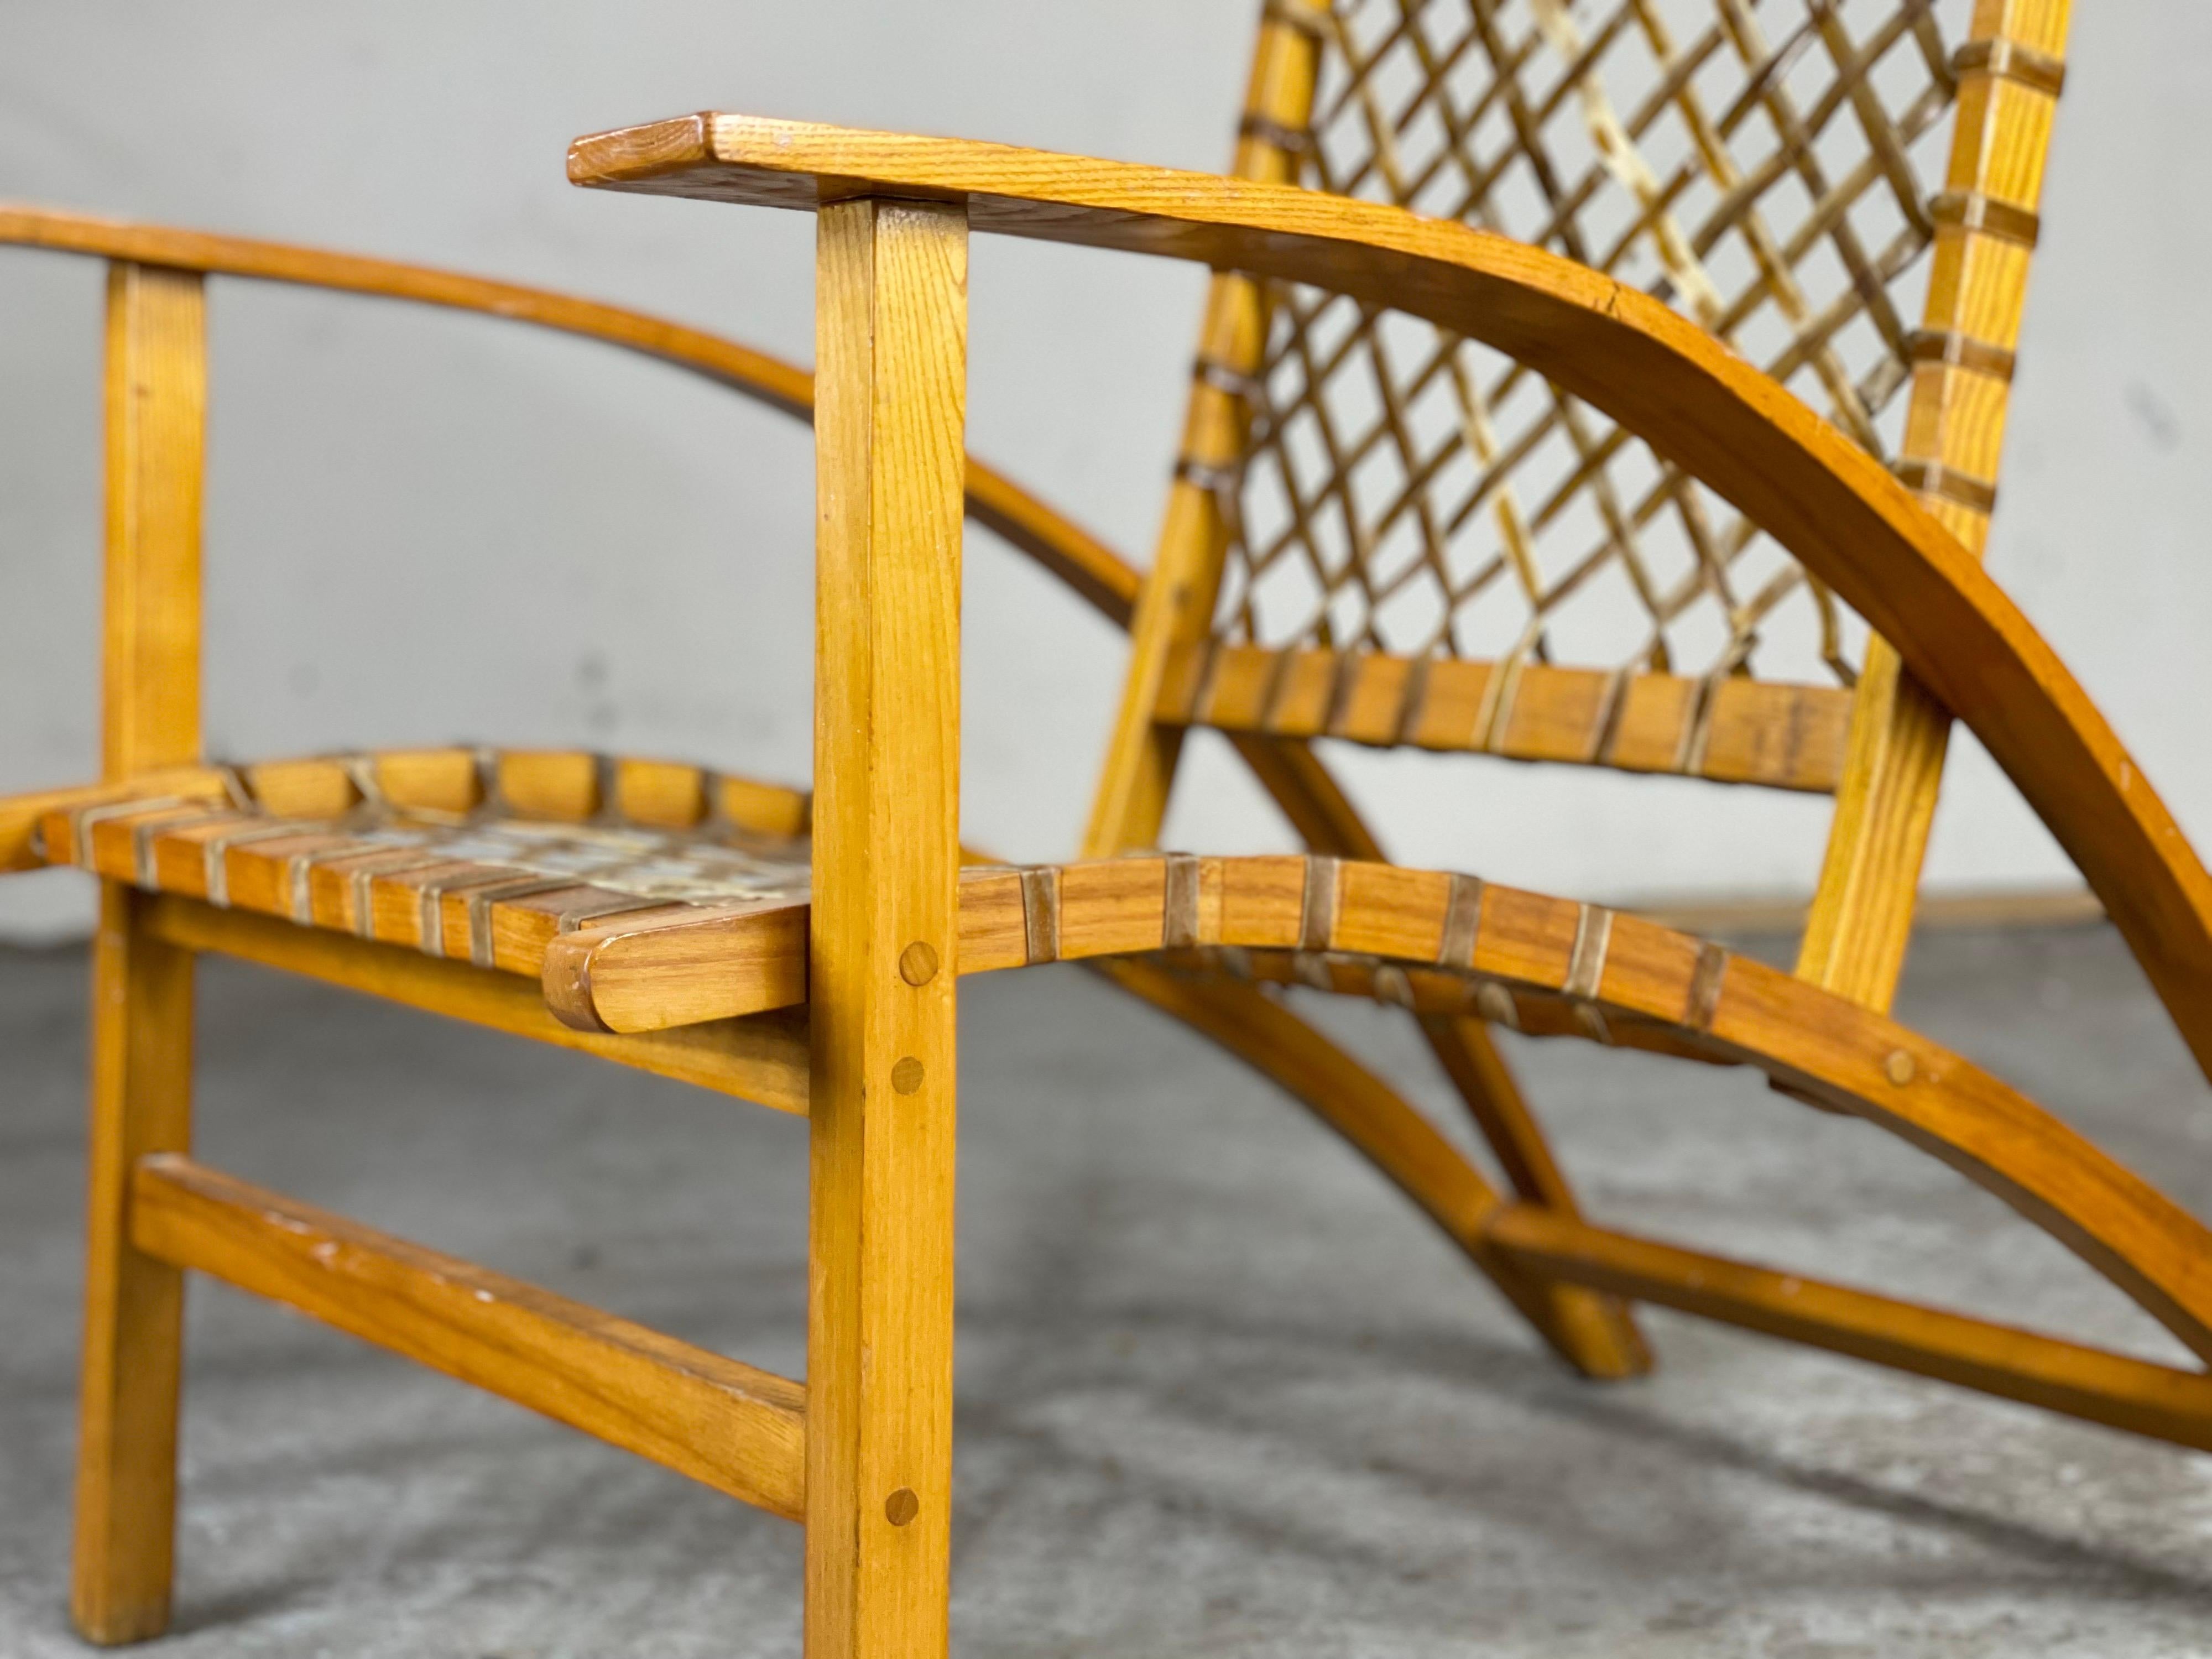 'Snow Shu' Lounge Chair by Carl Koch for Vermont Tubbs 1952 Adirondack Style 4